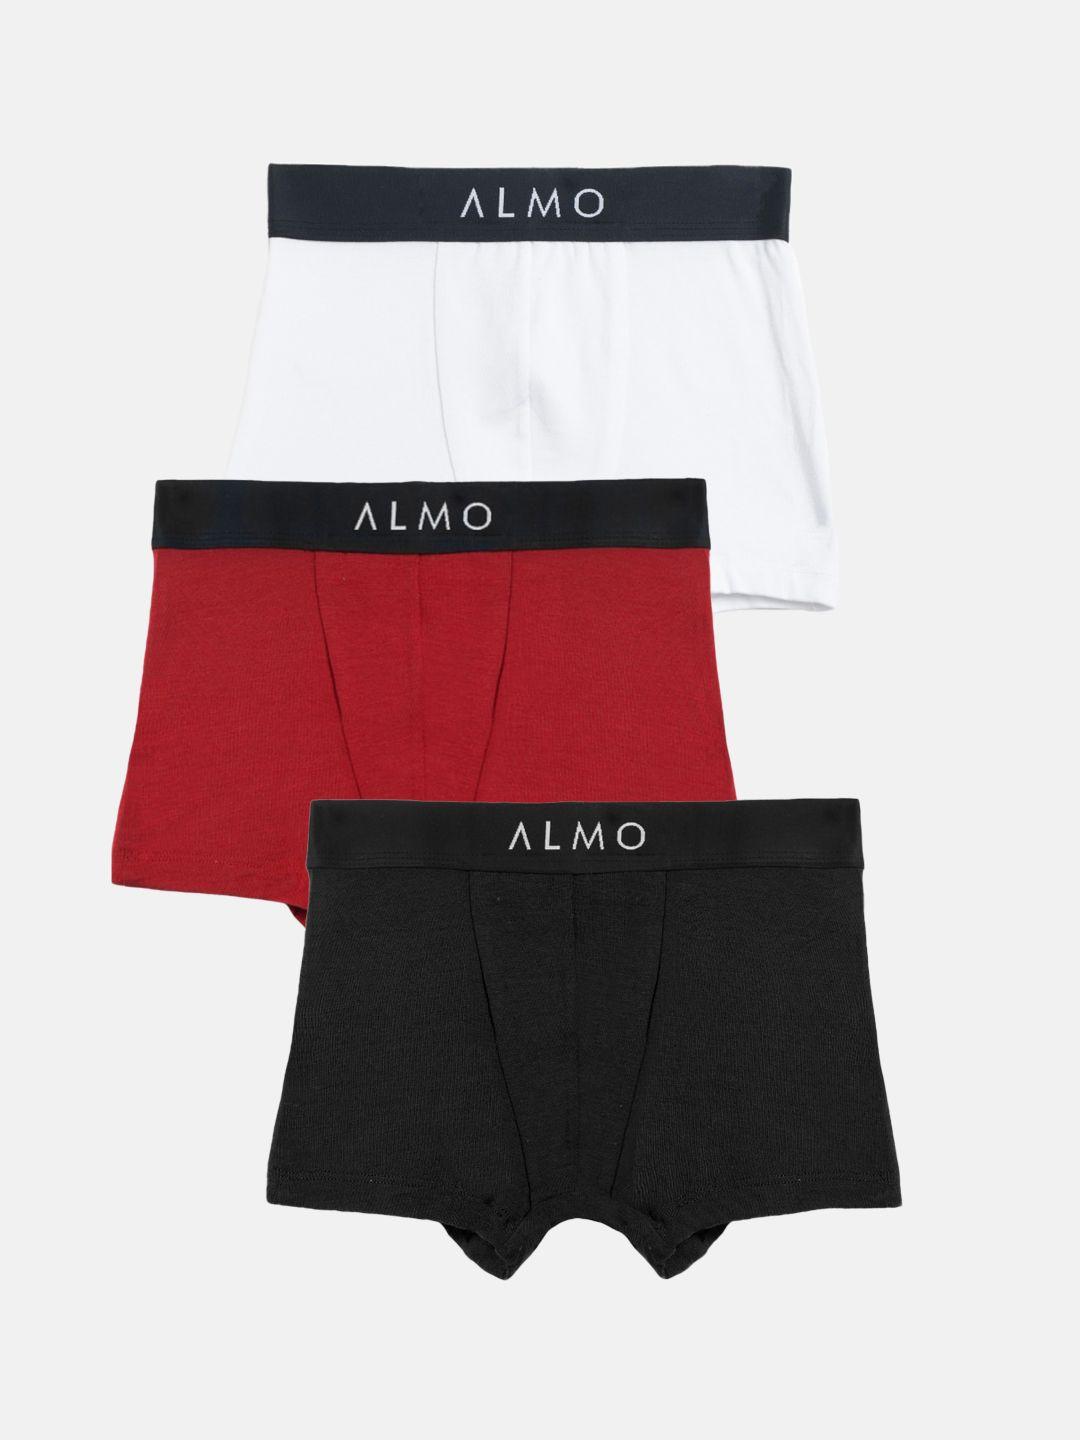 almo wear pack of 3 logo printed detail trunks